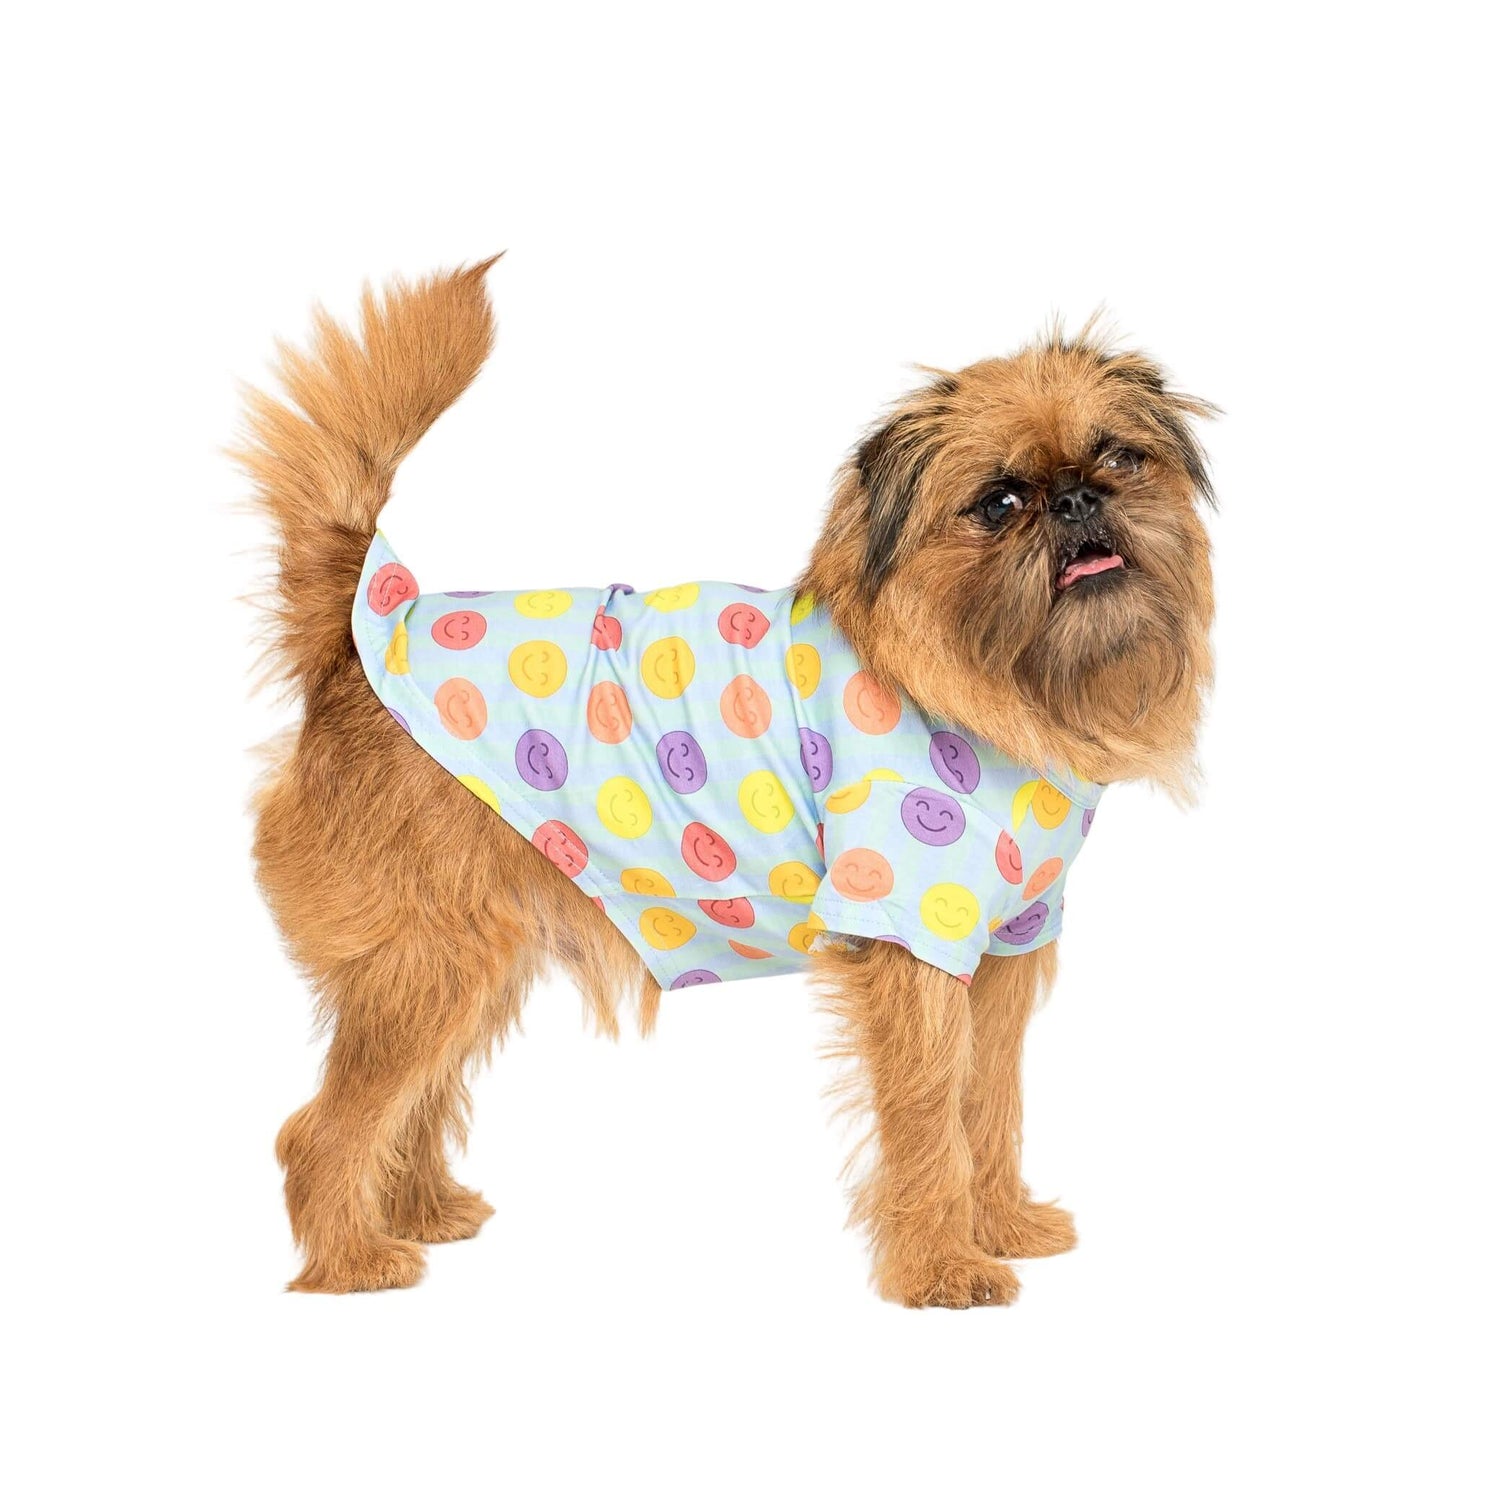 A griffon wearing a Vibrant Hound dog shirt. This dog shirt has rainbow coloured smiley faces.